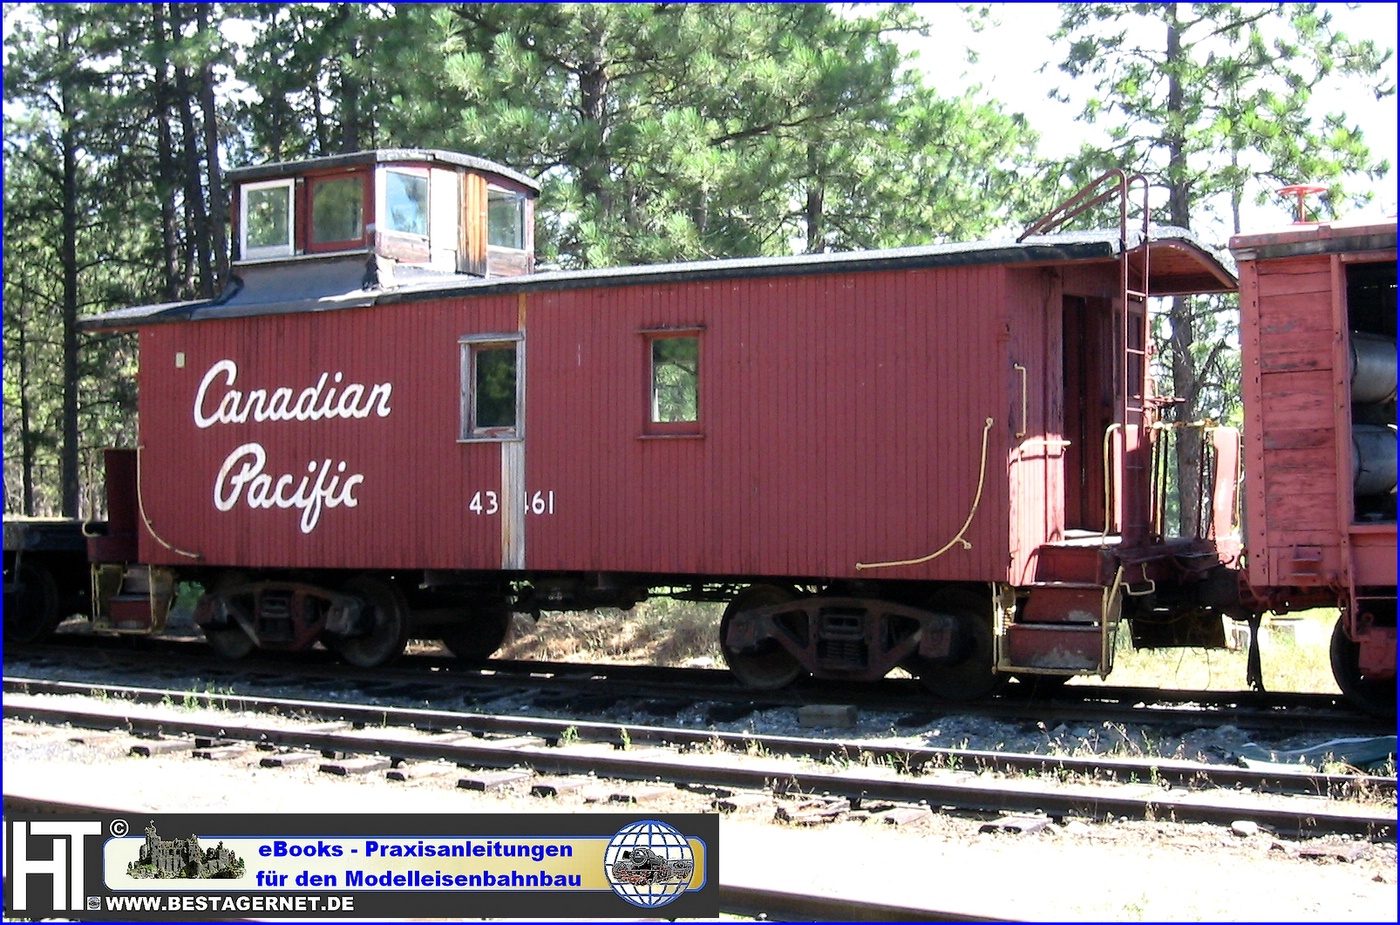 Canadian Pacific caboose 43461